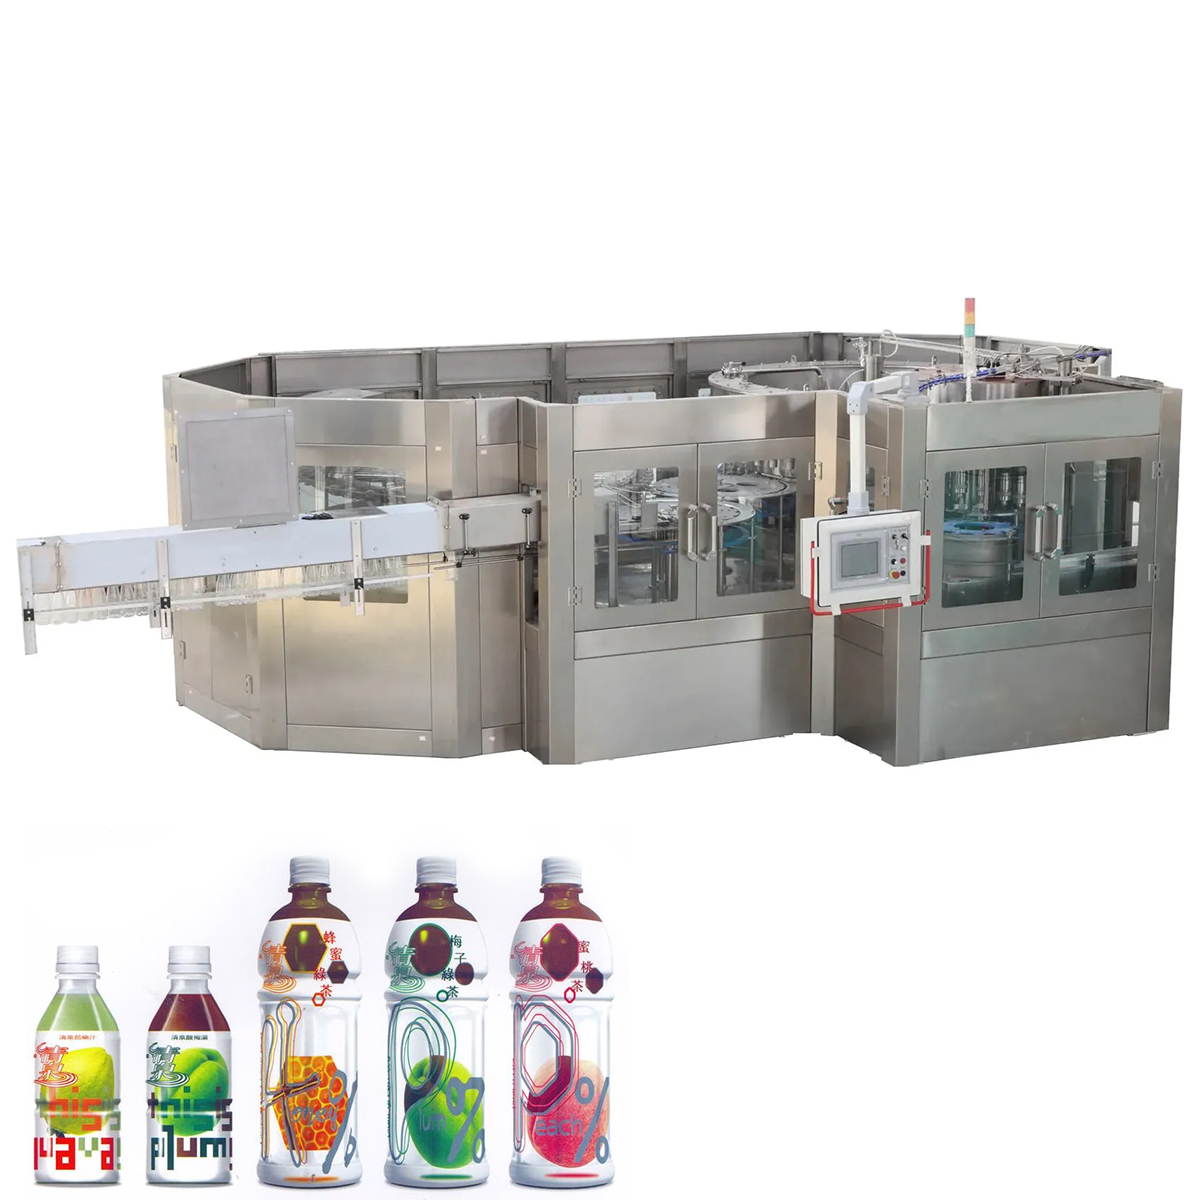 HZM Machinery Offers High-Quality Beverage Filling Machines